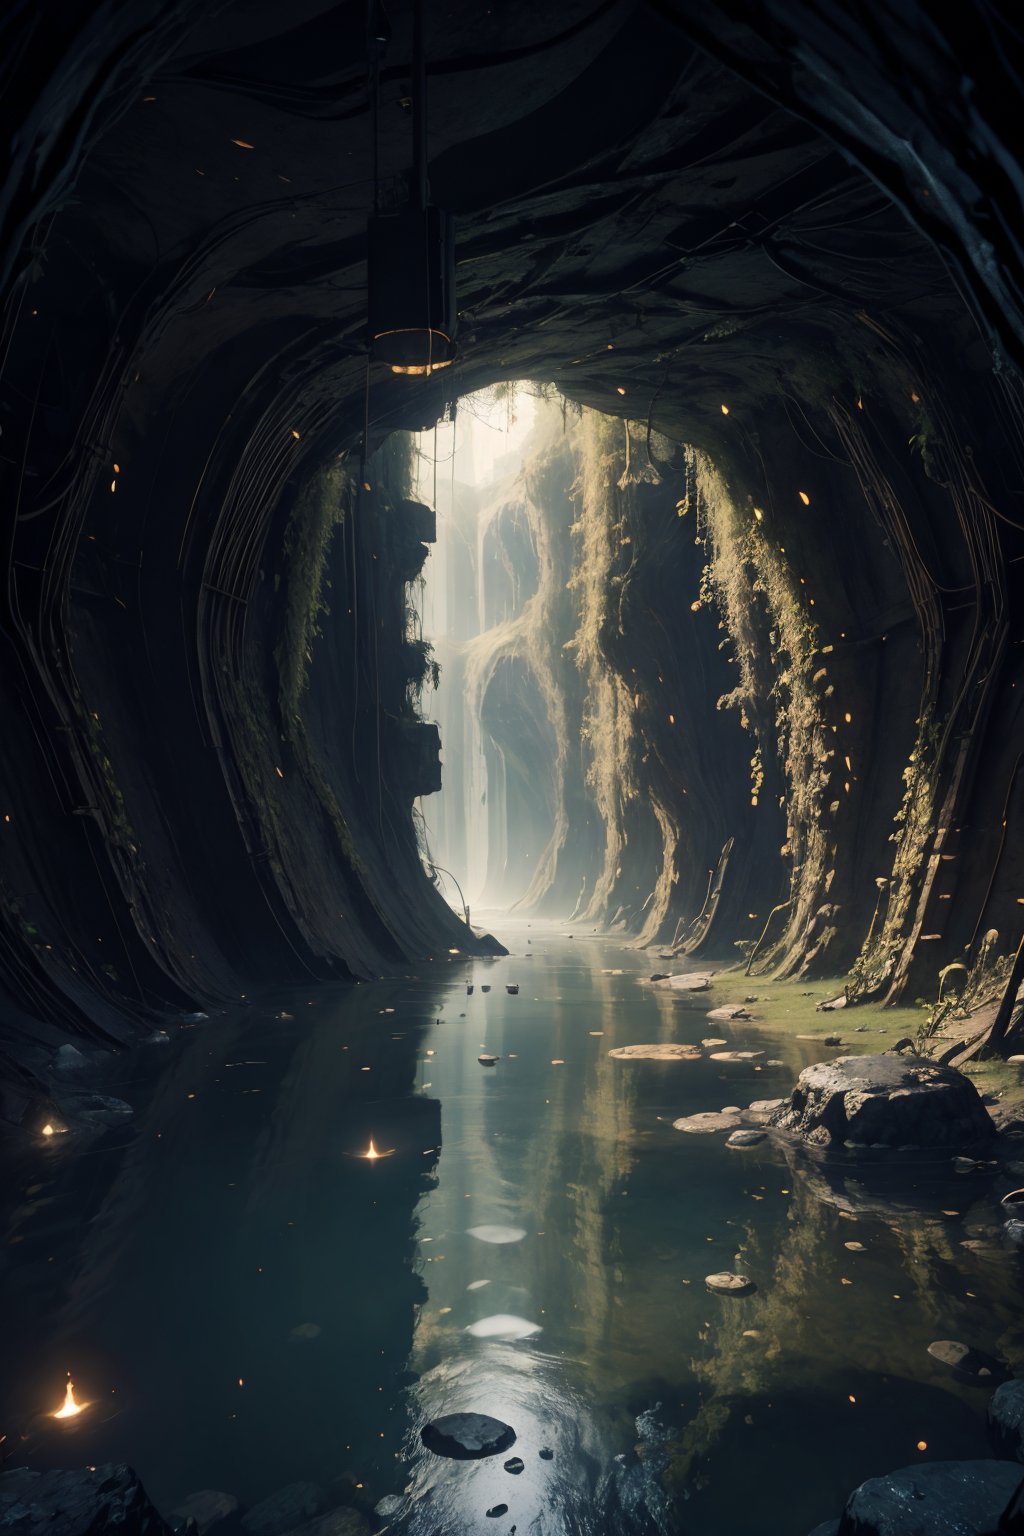 masterpiece, best quality, aethetic, Hidden chambers and underground rivers, offering a sense of mystery and exploration within the depths of the Earth,noc-landscape